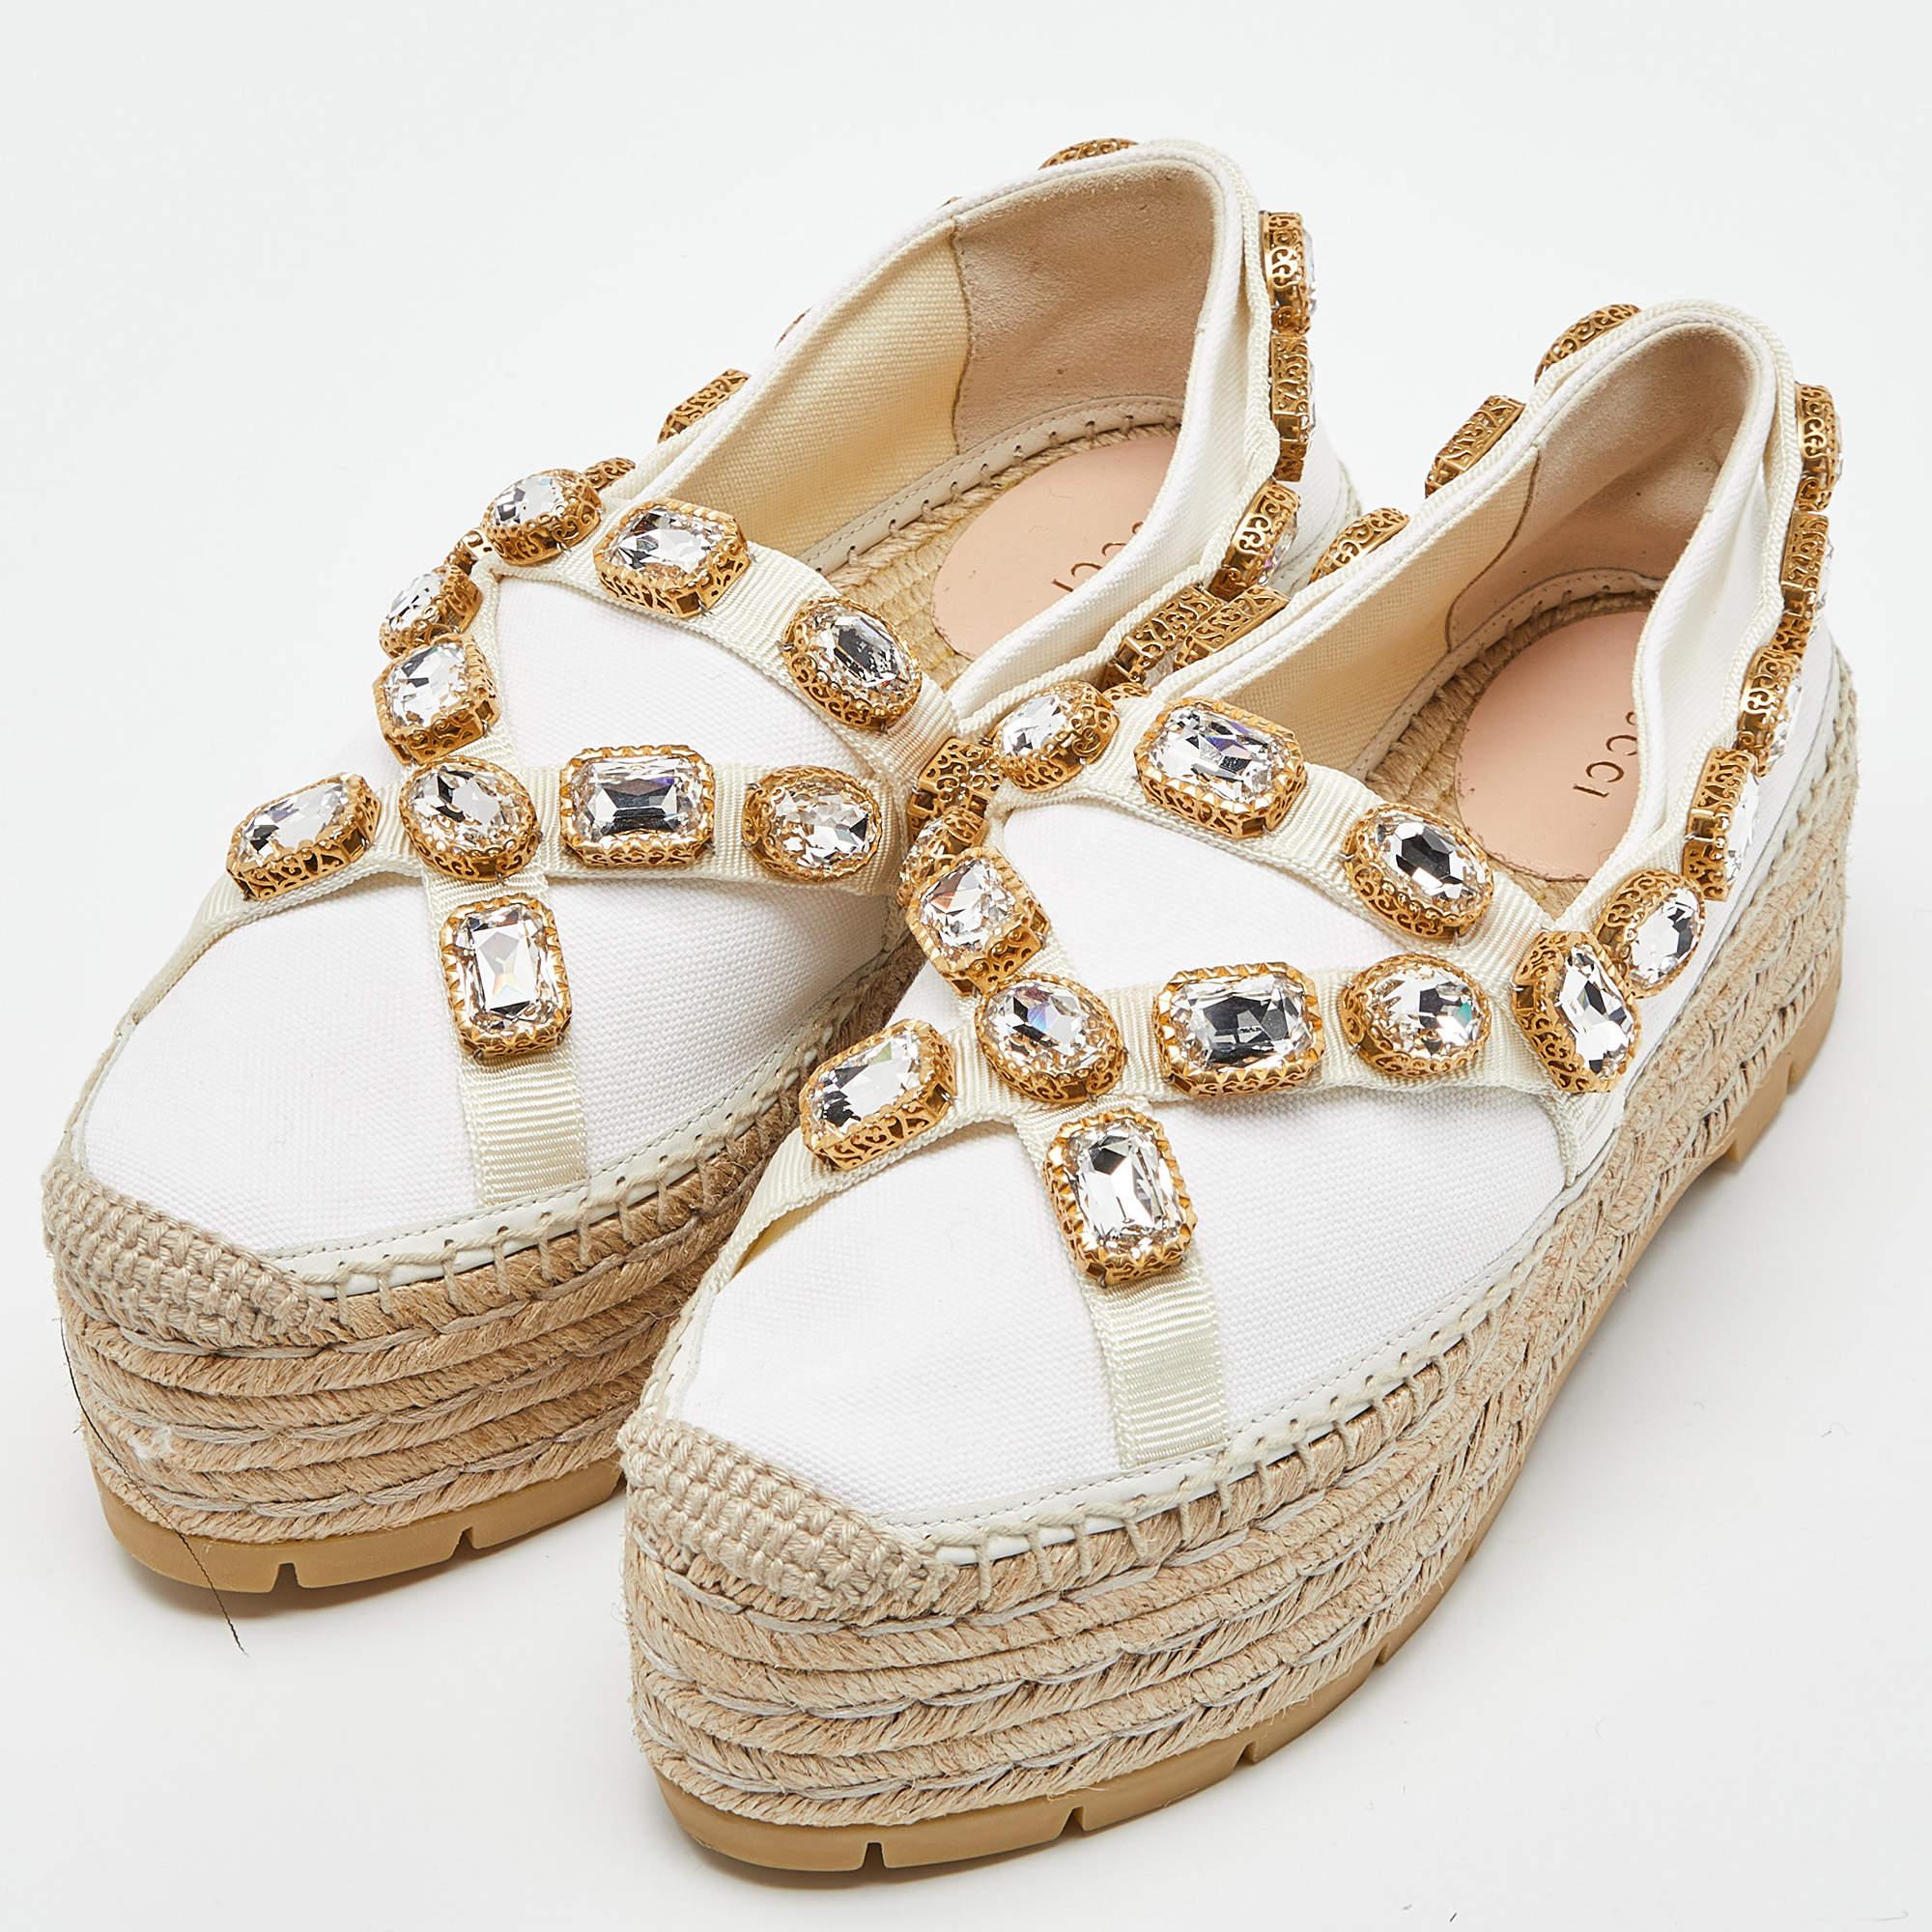 Effortlessly chic and stylish, these flats from Gucci are what your wardrobe has been missing all this while! The flats are well-crafted from white canvas and decorated with crystals on the uppers. Comfortable insoles and espadrille midsoles